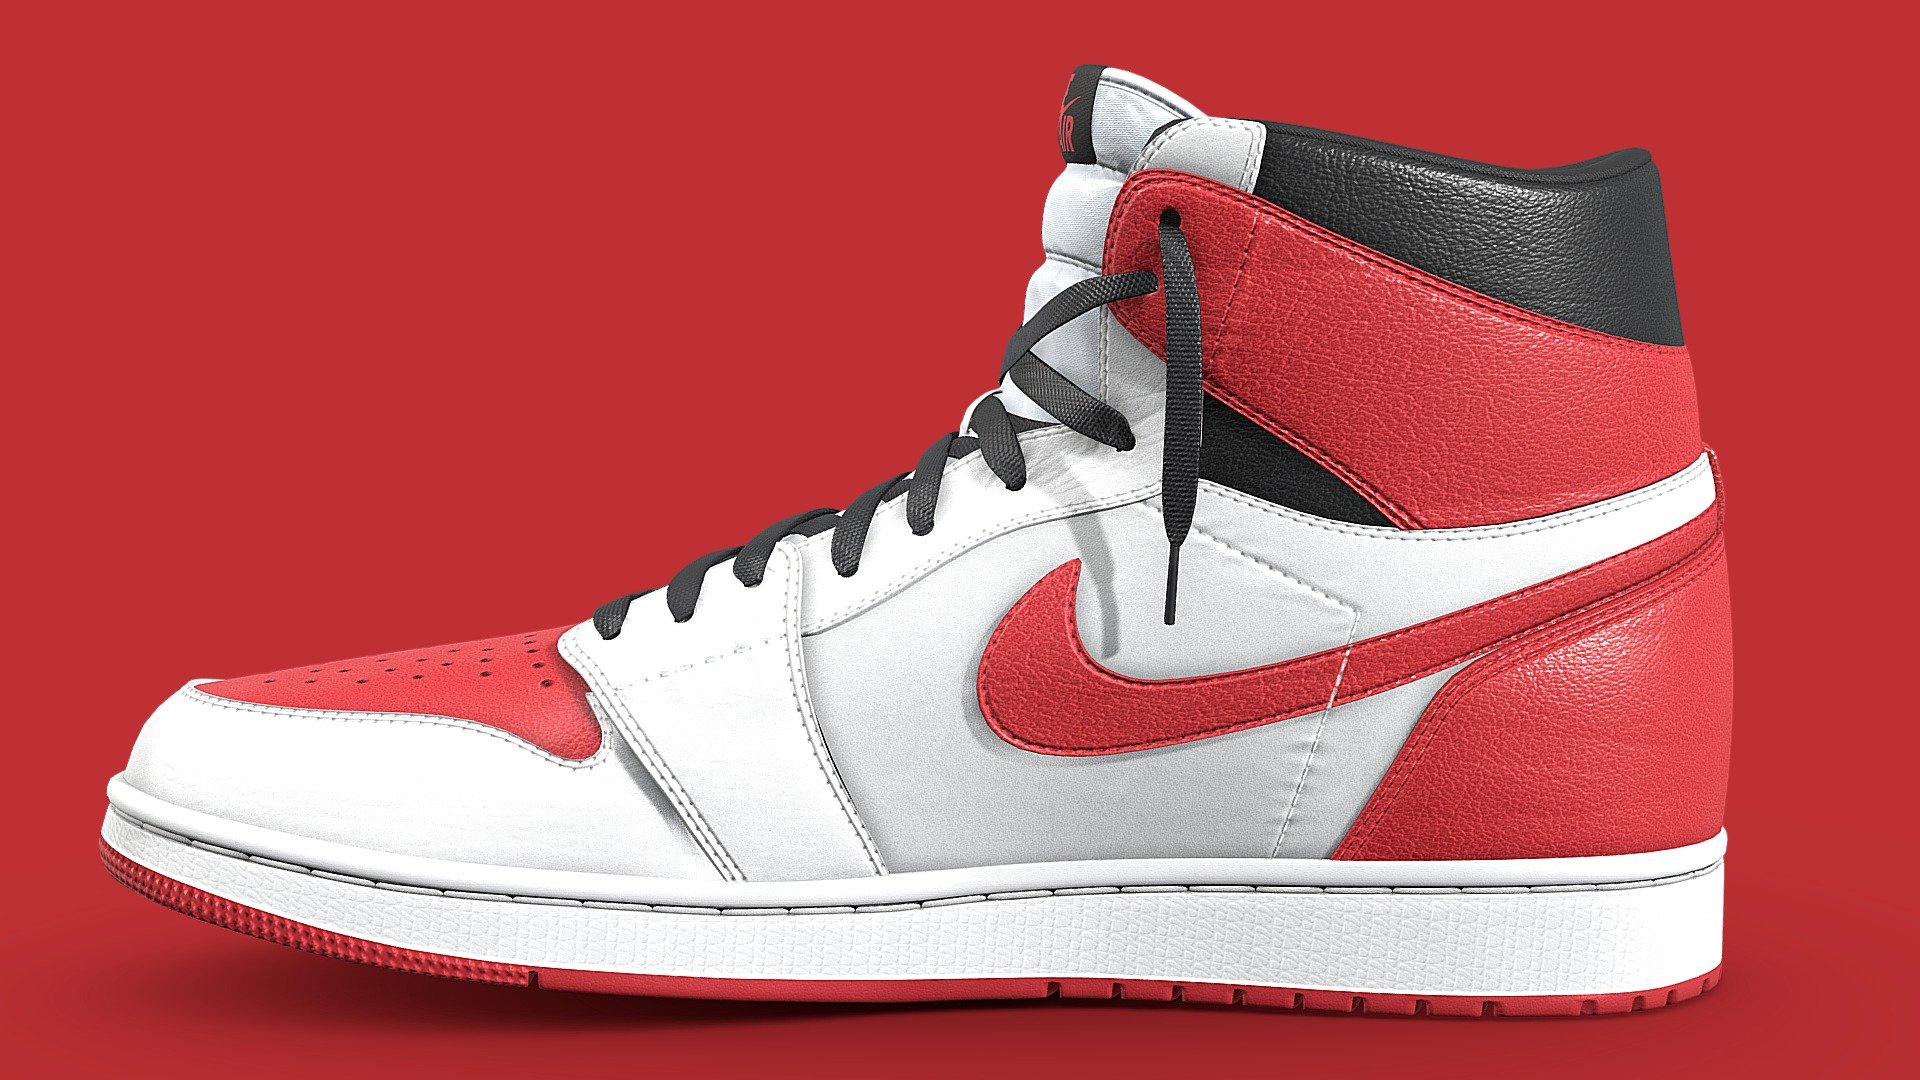 New Colourway of the AIr Jordan 1, combines the classic colours of a Chicago with the colour blocking of the Travis Scott x Fragment collaboration 

Free Download period for this shoe has ended - Jordan 1 Retro High OG Heritage - 3D model by Joe-Wall (@joewall) 3d model